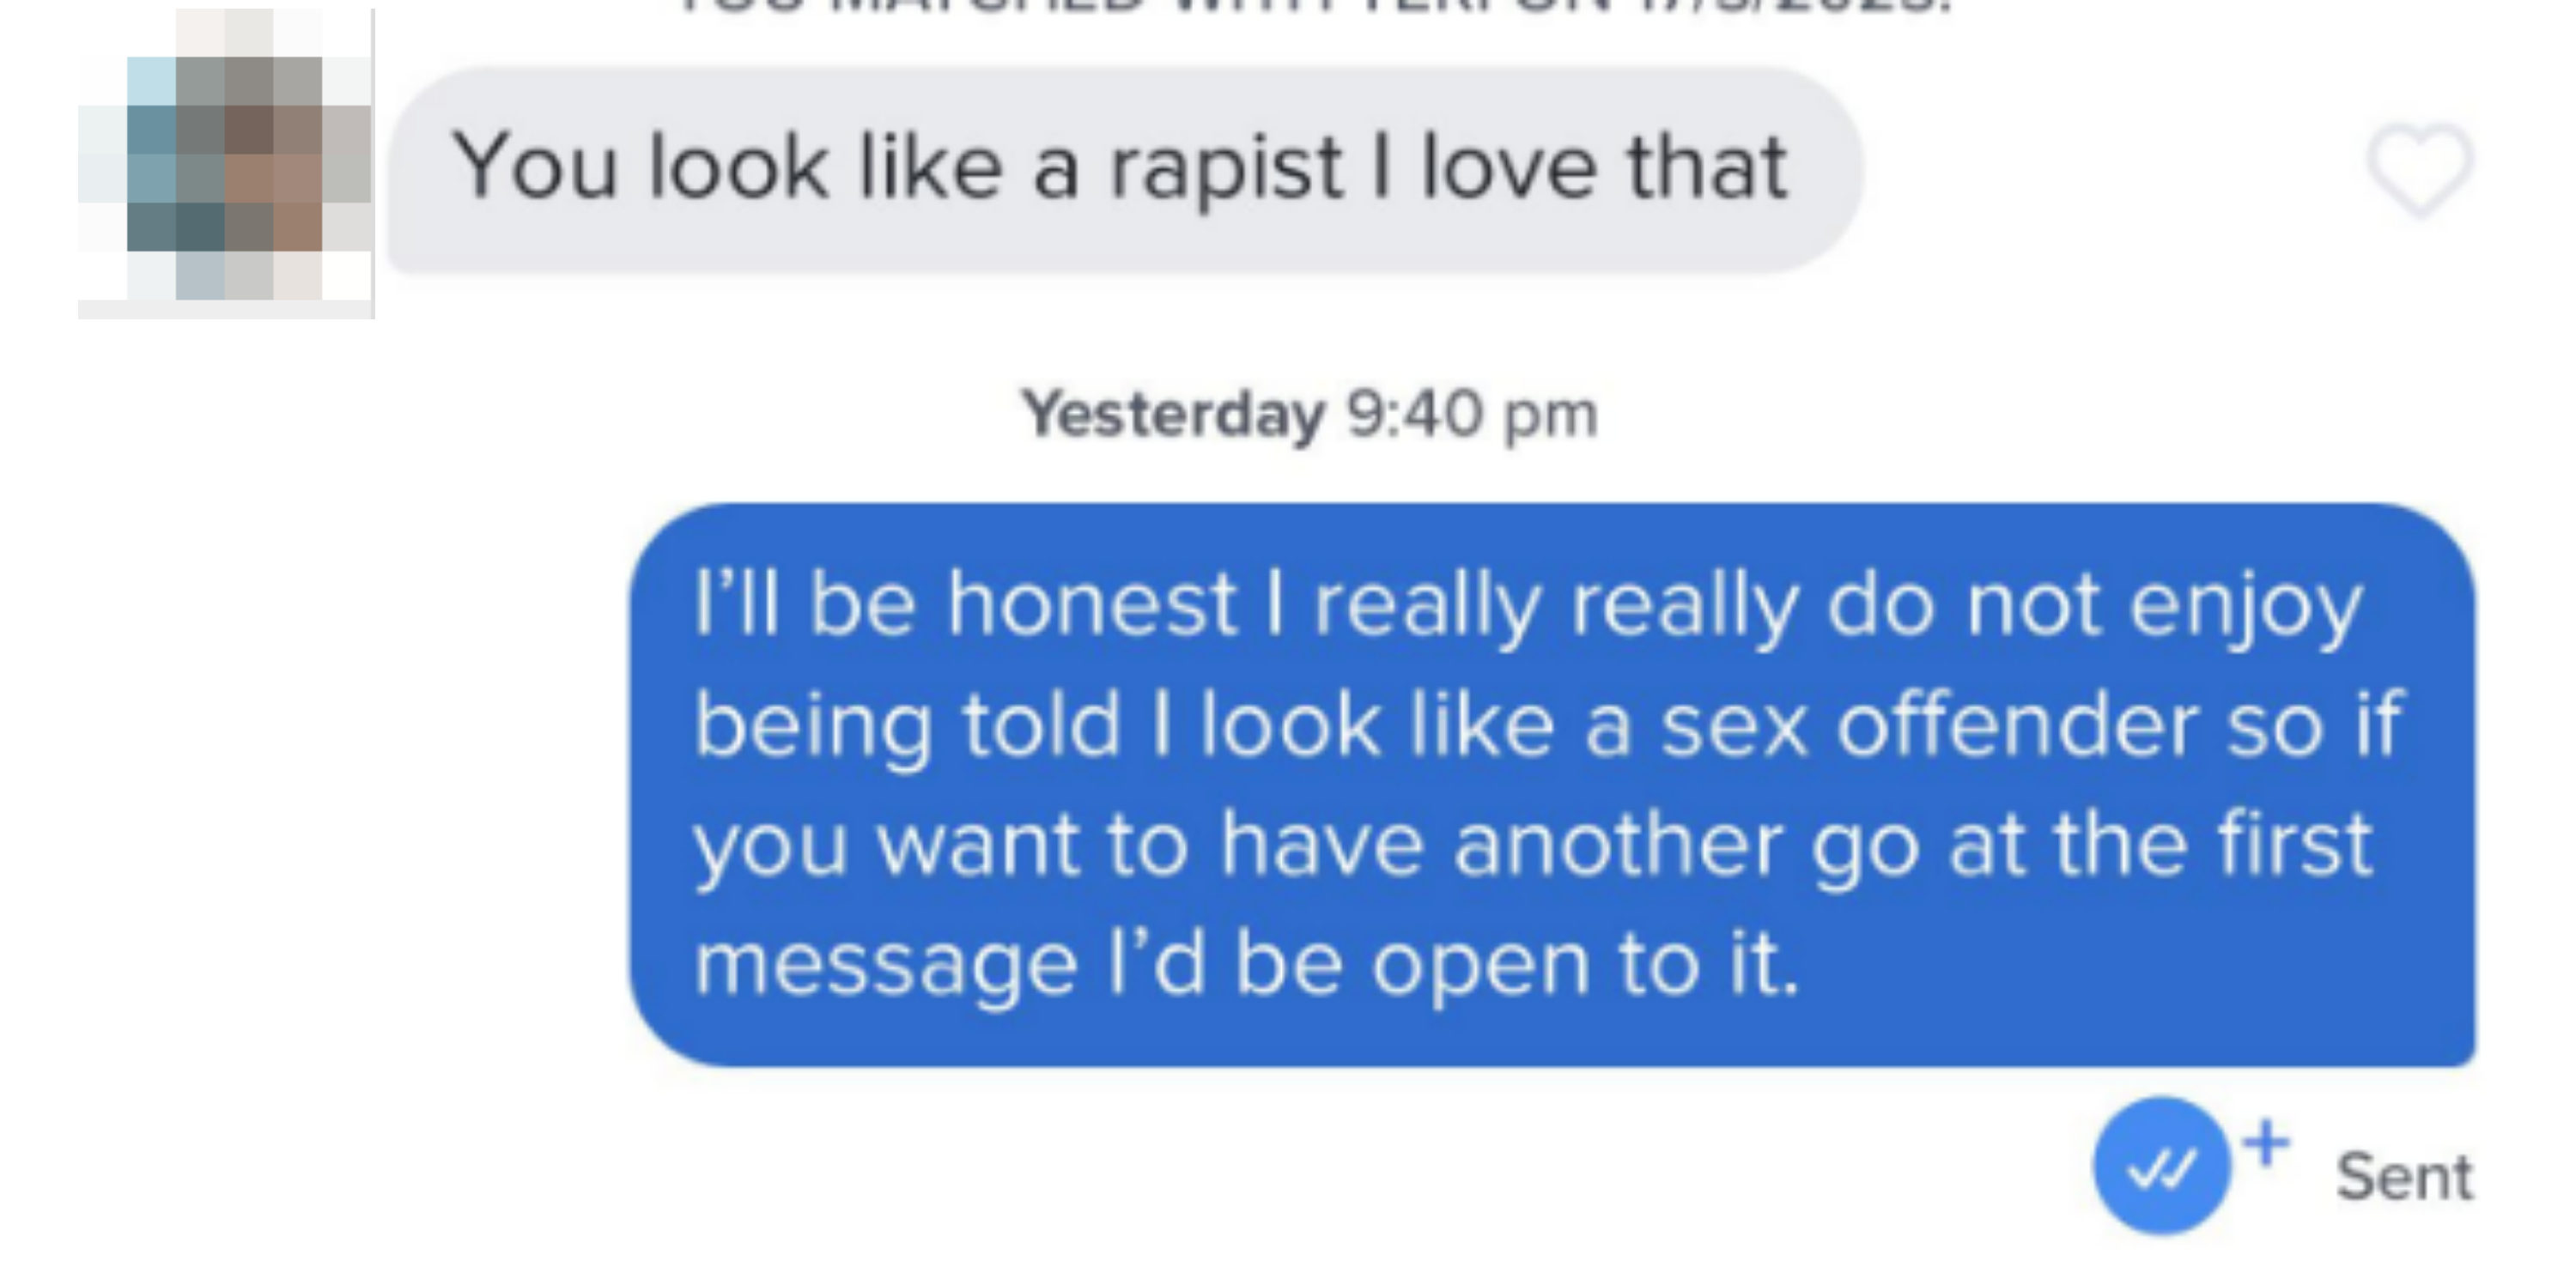 &quot;you look like a rapist i love that&quot; with reply saying they didn&#x27;t enjoy the comment